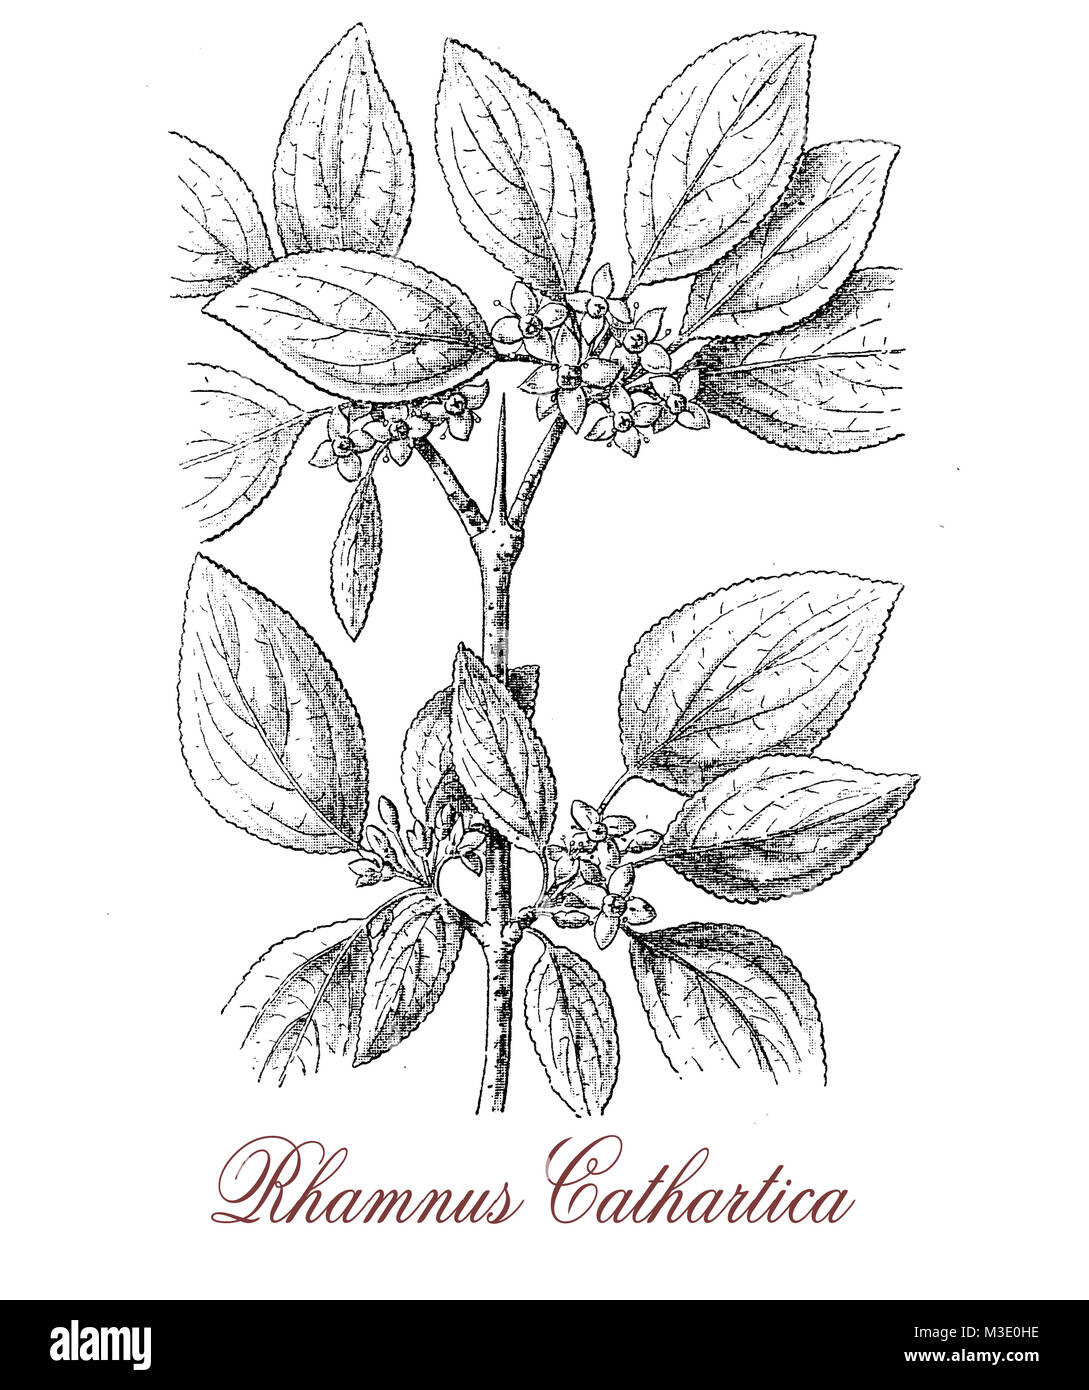 vintage engraving of common buckthorn or rhamnus cathartica, spiny shrub with black berries,  the plant is mildly poisonous, the bark has purgative effect. Stock Photo